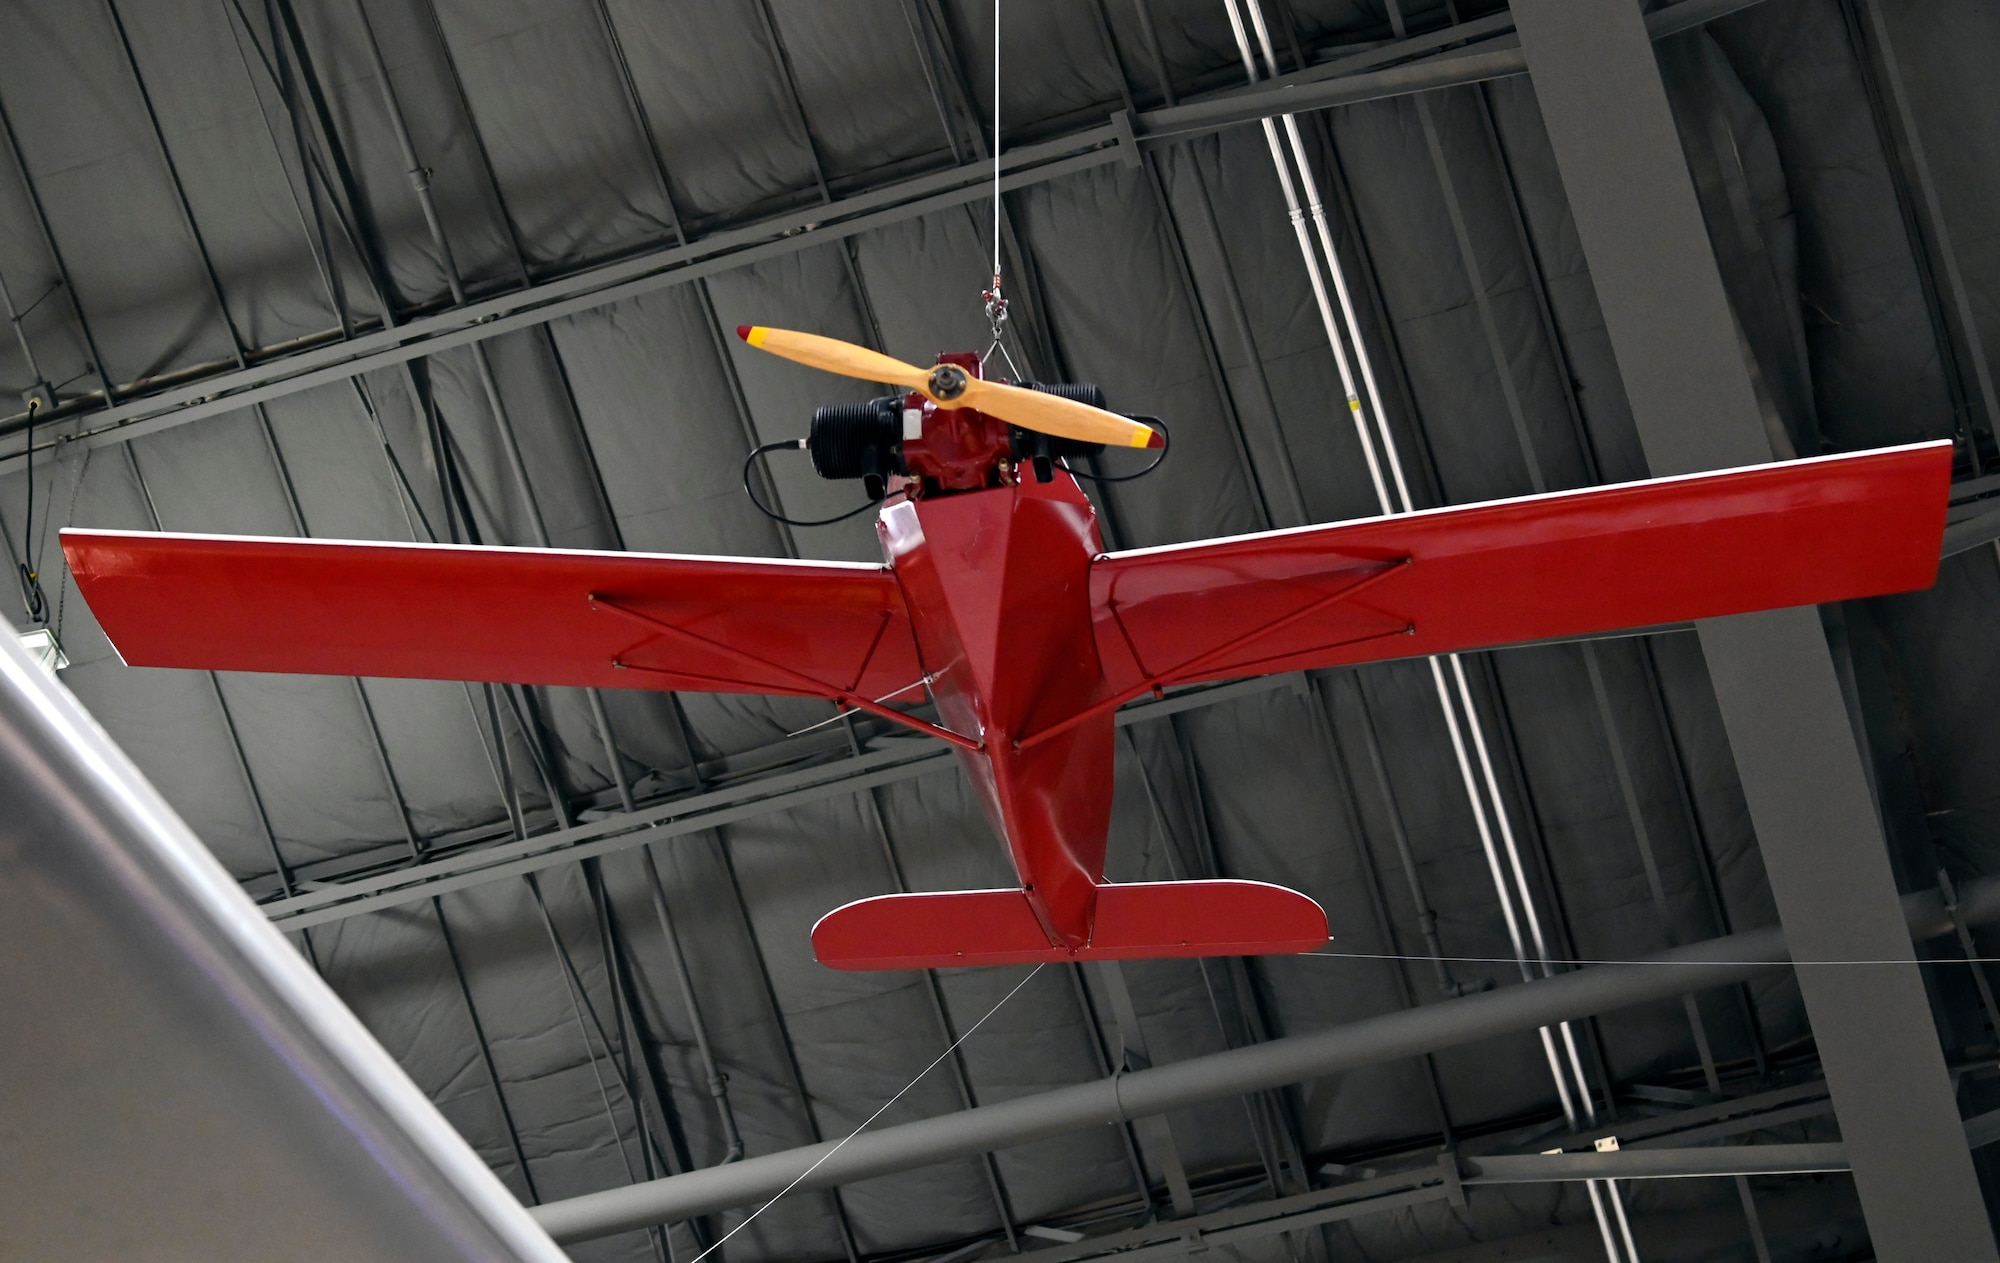 Radioplane OQ-14 on display in the National Museum of the U.S. Air Force Korean War Gallery.